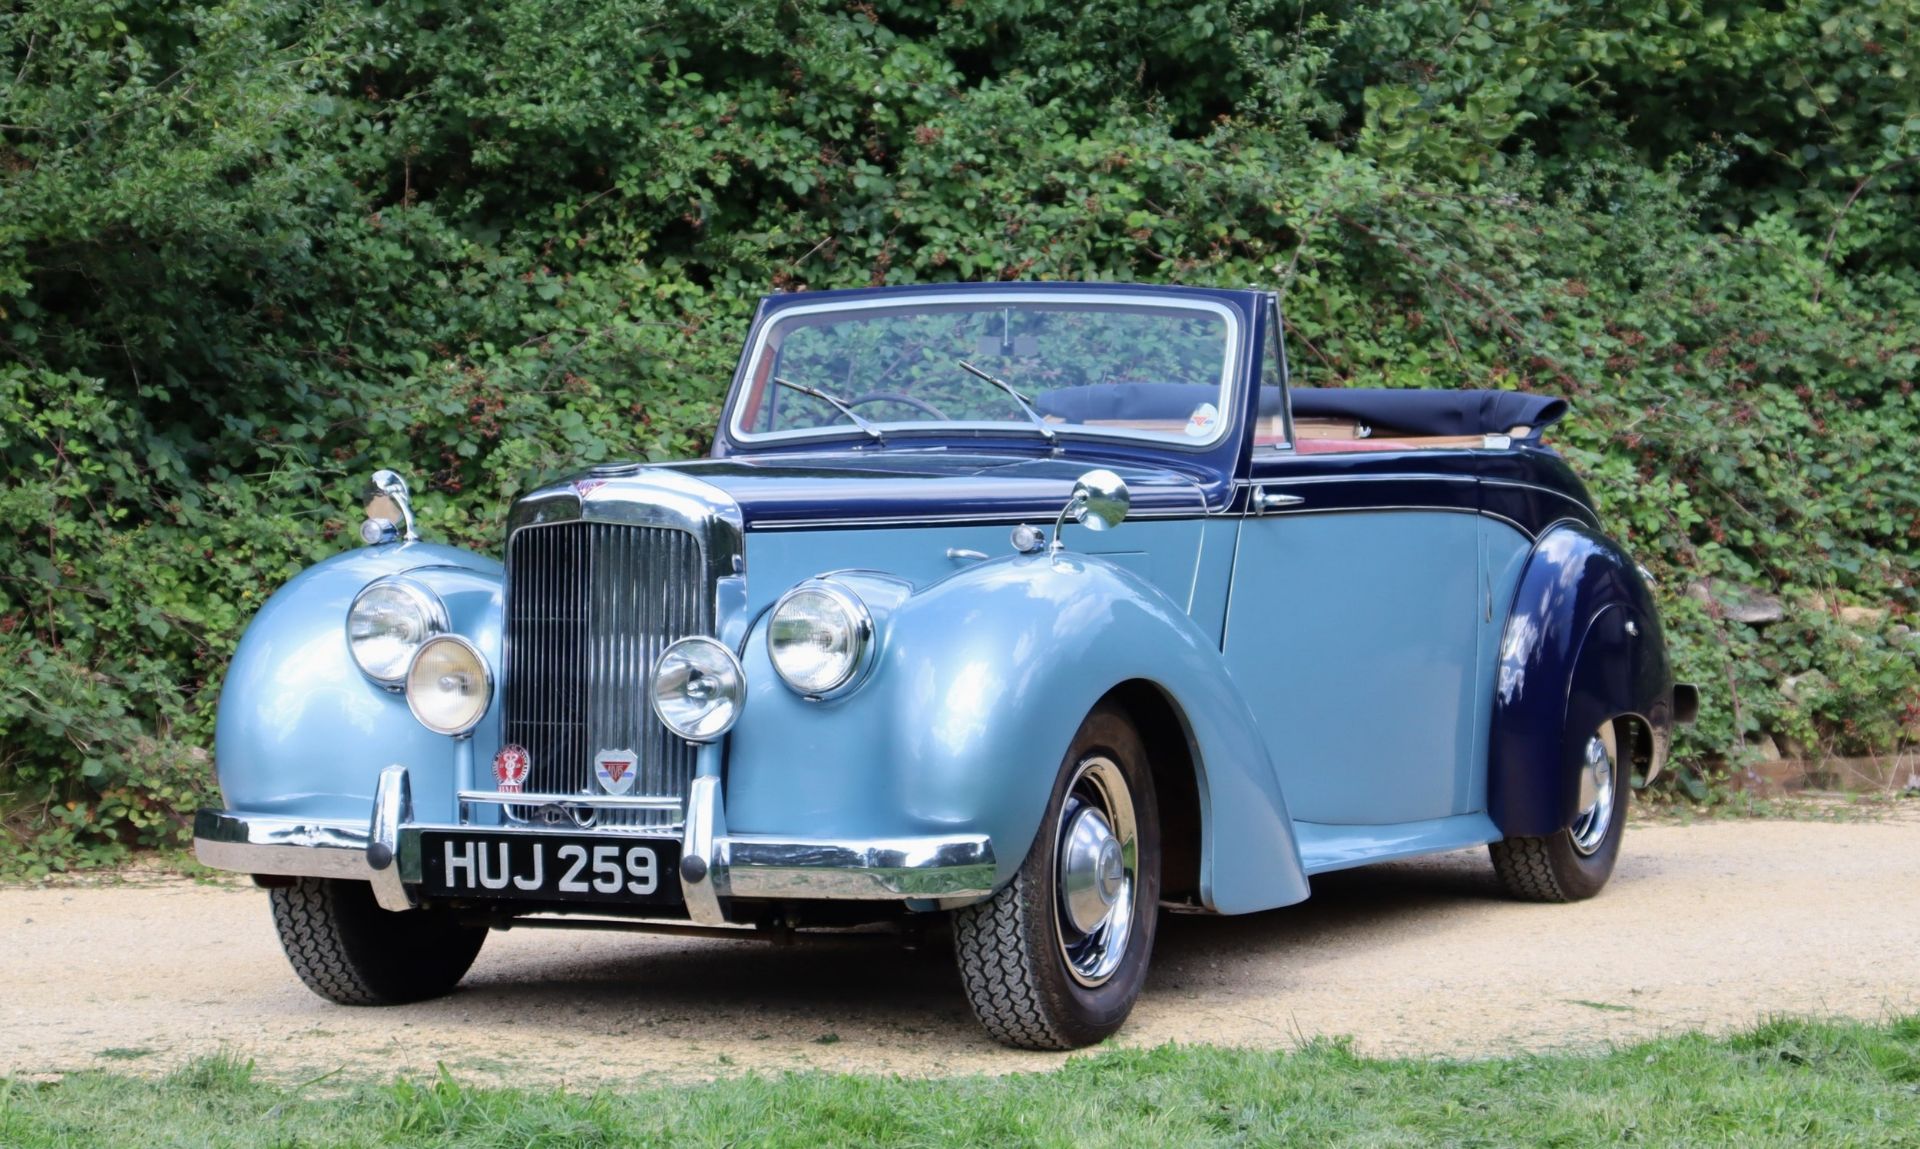 1952 ALVIS TA21 THREE-POSITION DROPHEAD COUPE Registration Number: HUJ 259 Chassis Number: 24489 - Image 44 of 44